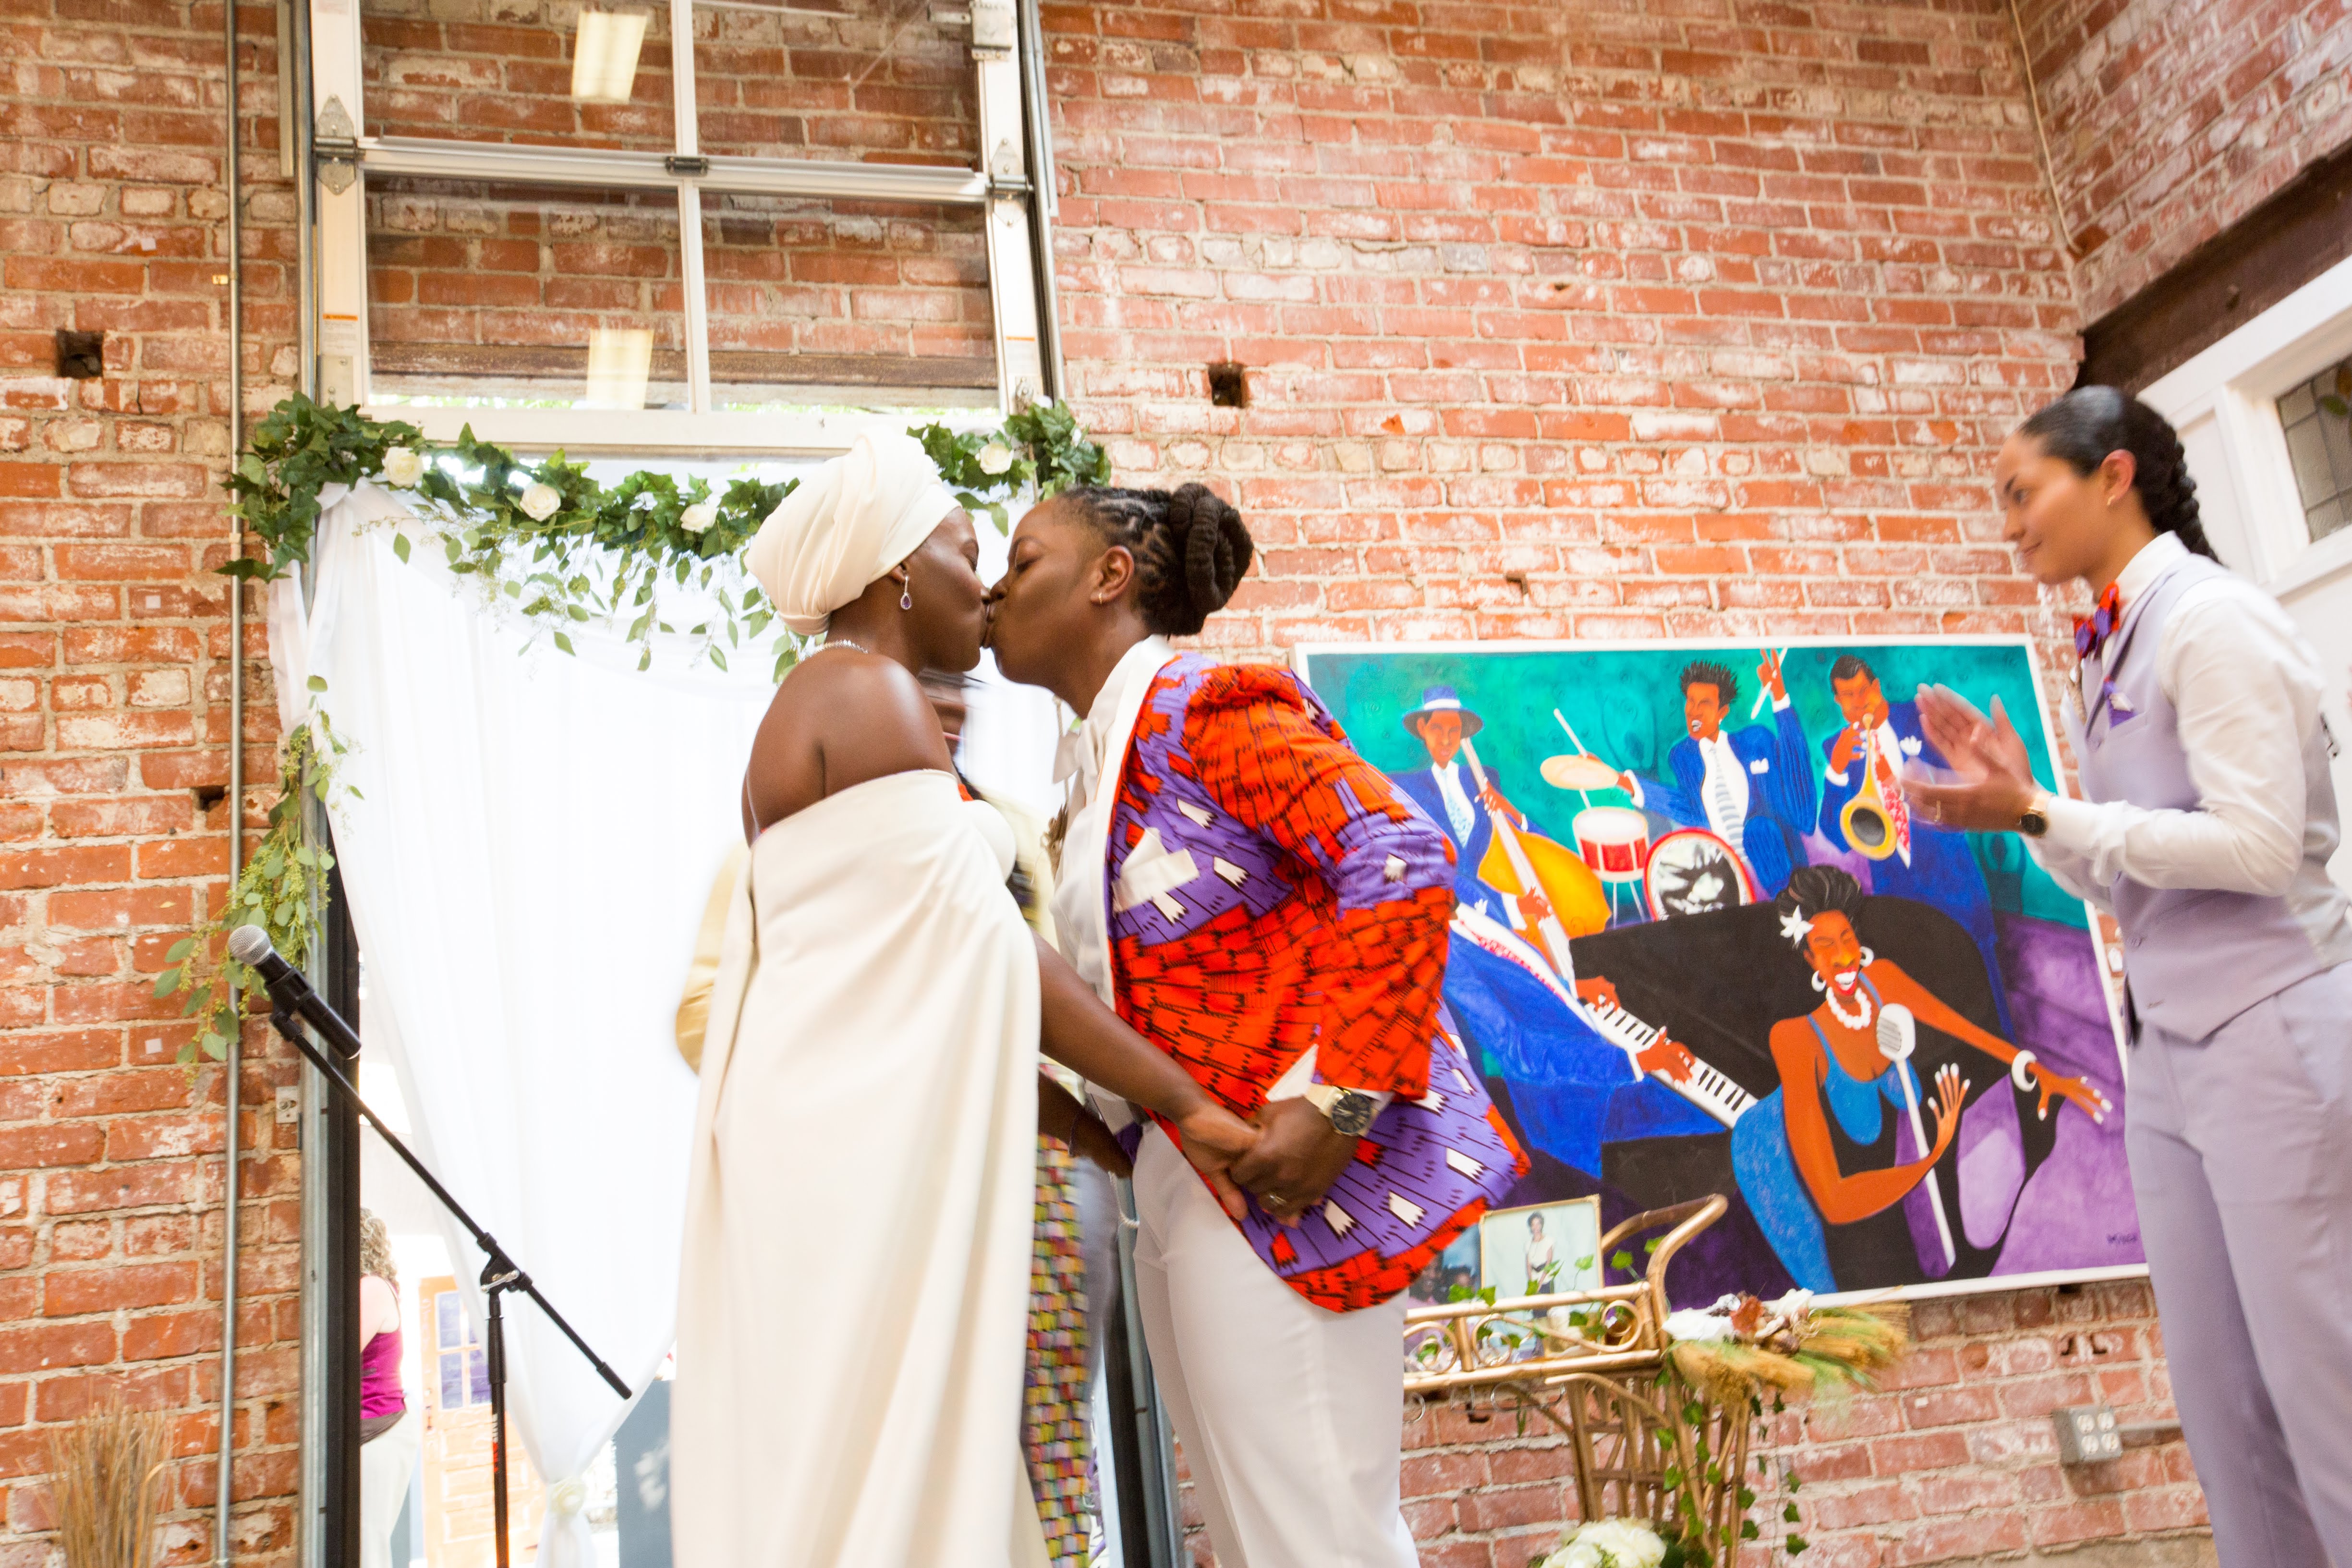 Bridal Bliss: Jeanelle and Jane's 'Crooklyn'-Inspired Reception Had So Much Black Pride